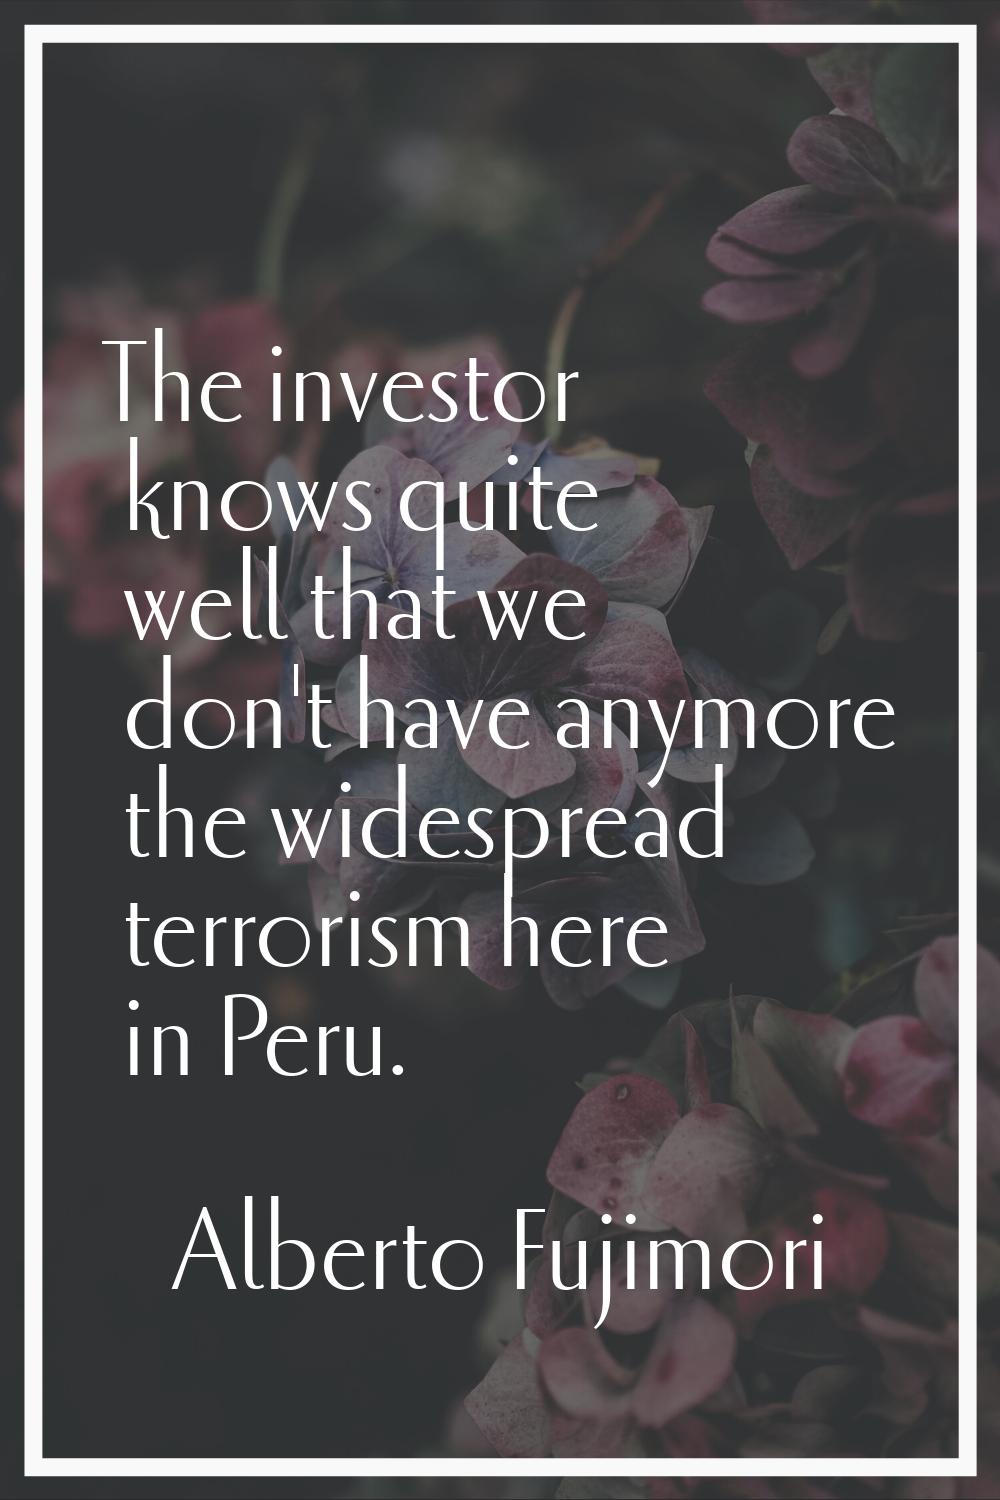 The investor knows quite well that we don't have anymore the widespread terrorism here in Peru.